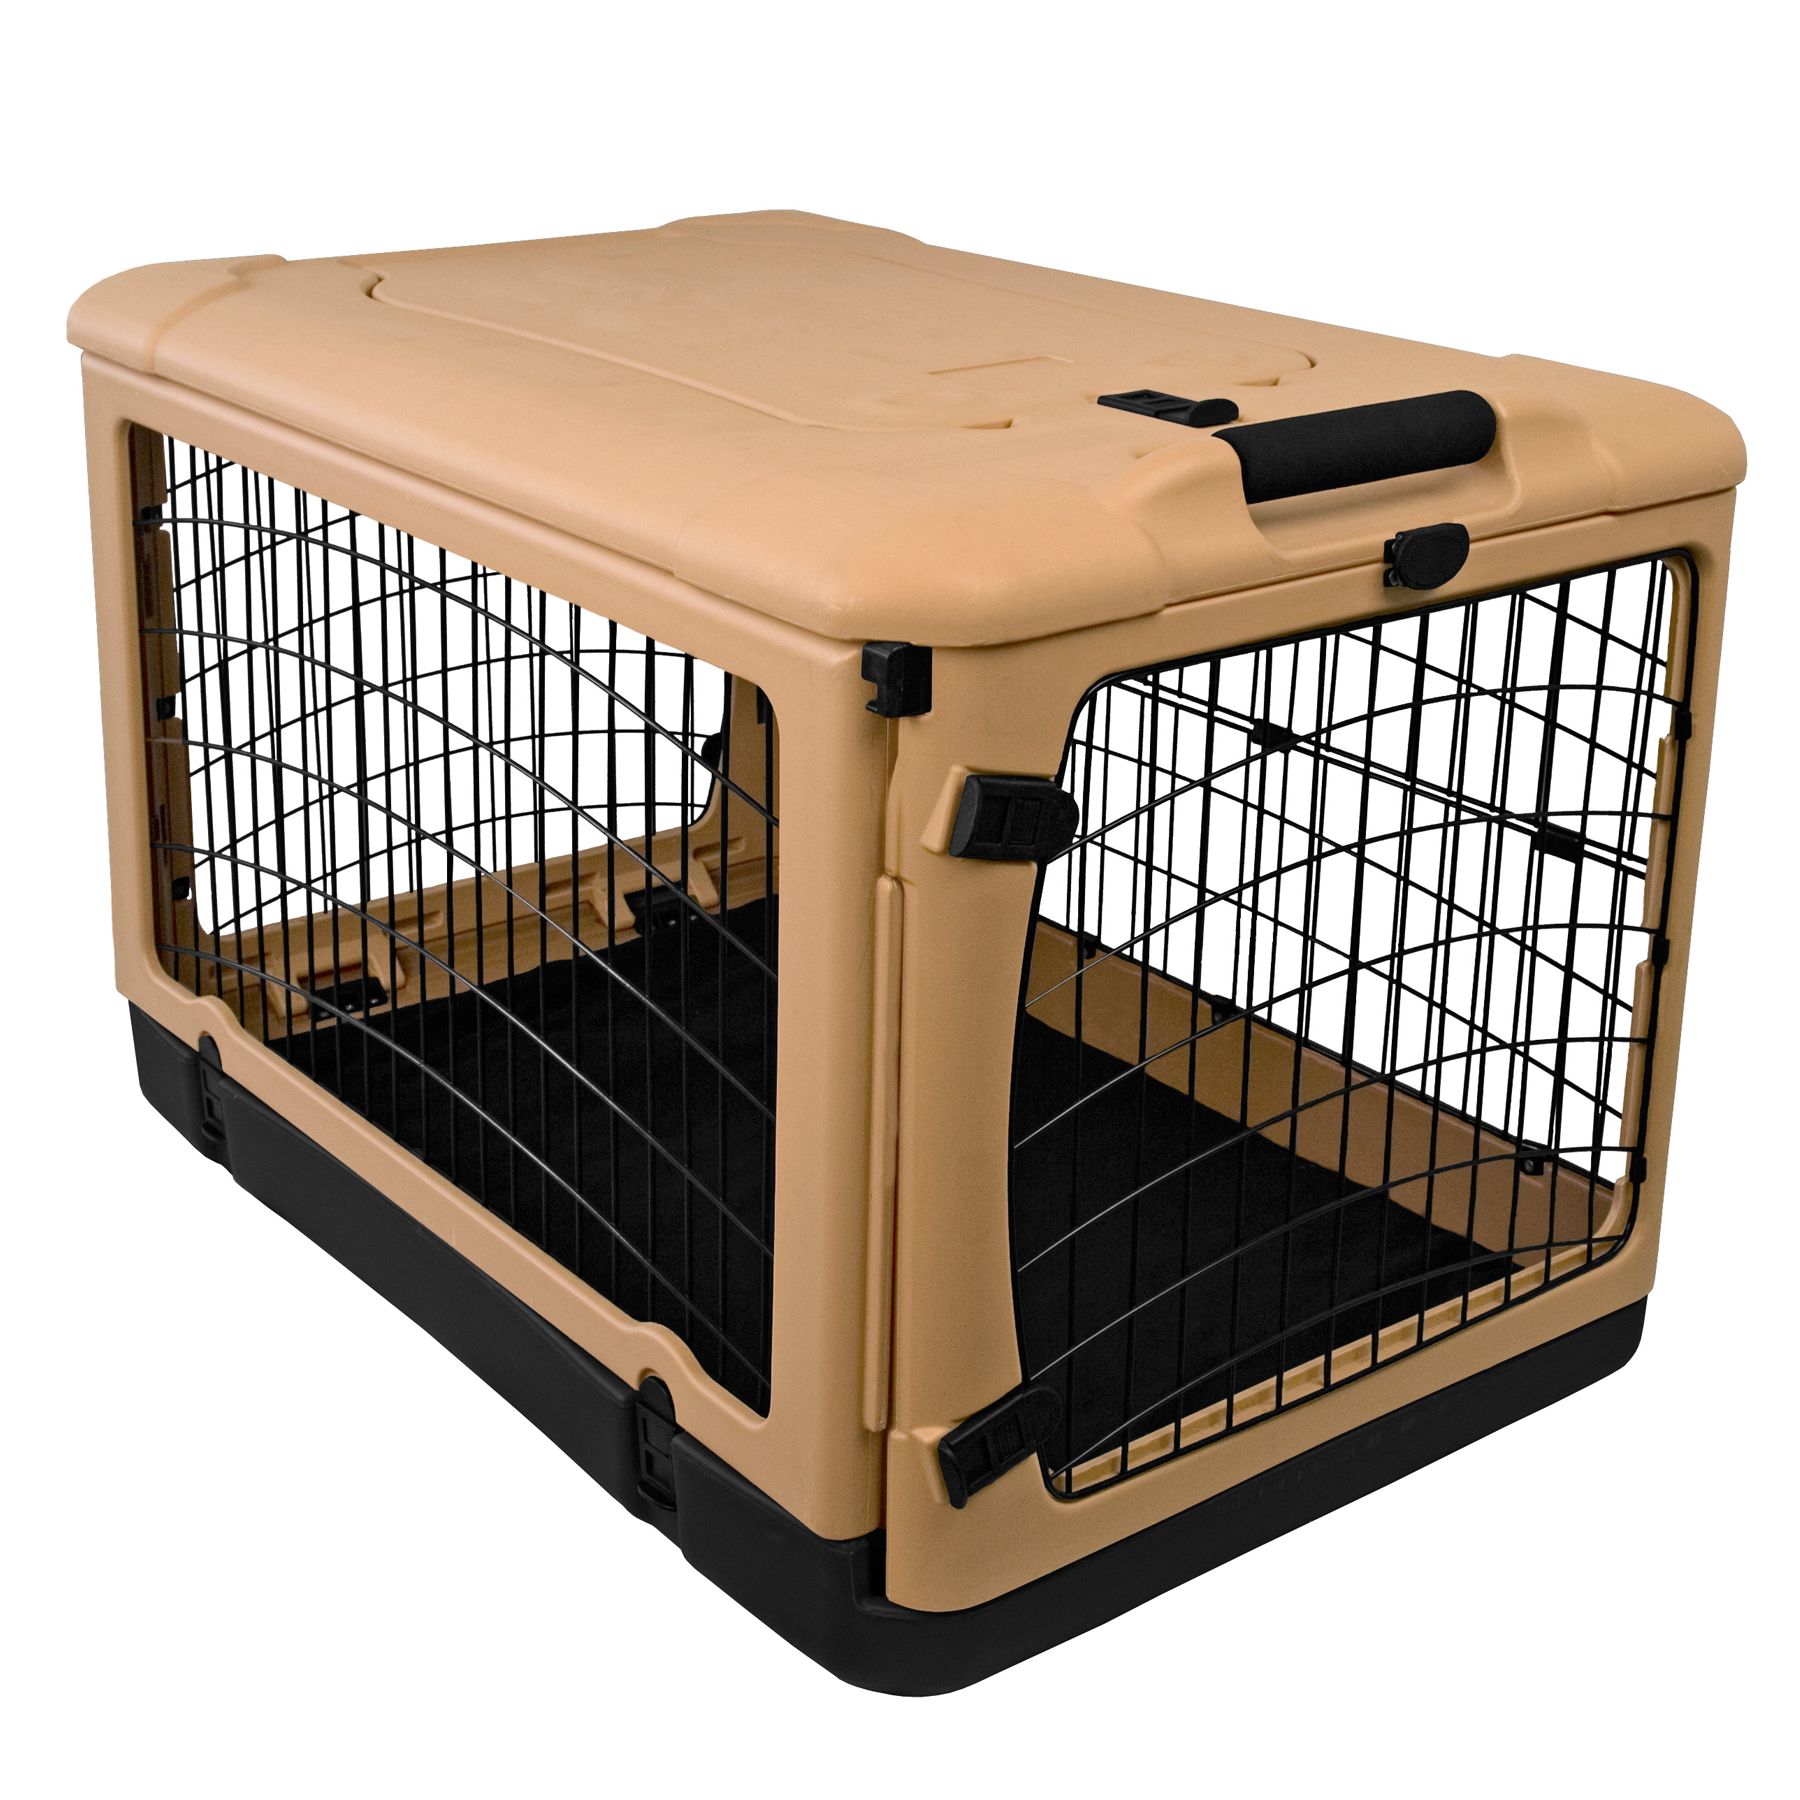 Chocolate Pet Gear “The Other Door” 4 Door Steel Crate with Plush Bed 27-Inch Travel Bag for Cats/Dogs 